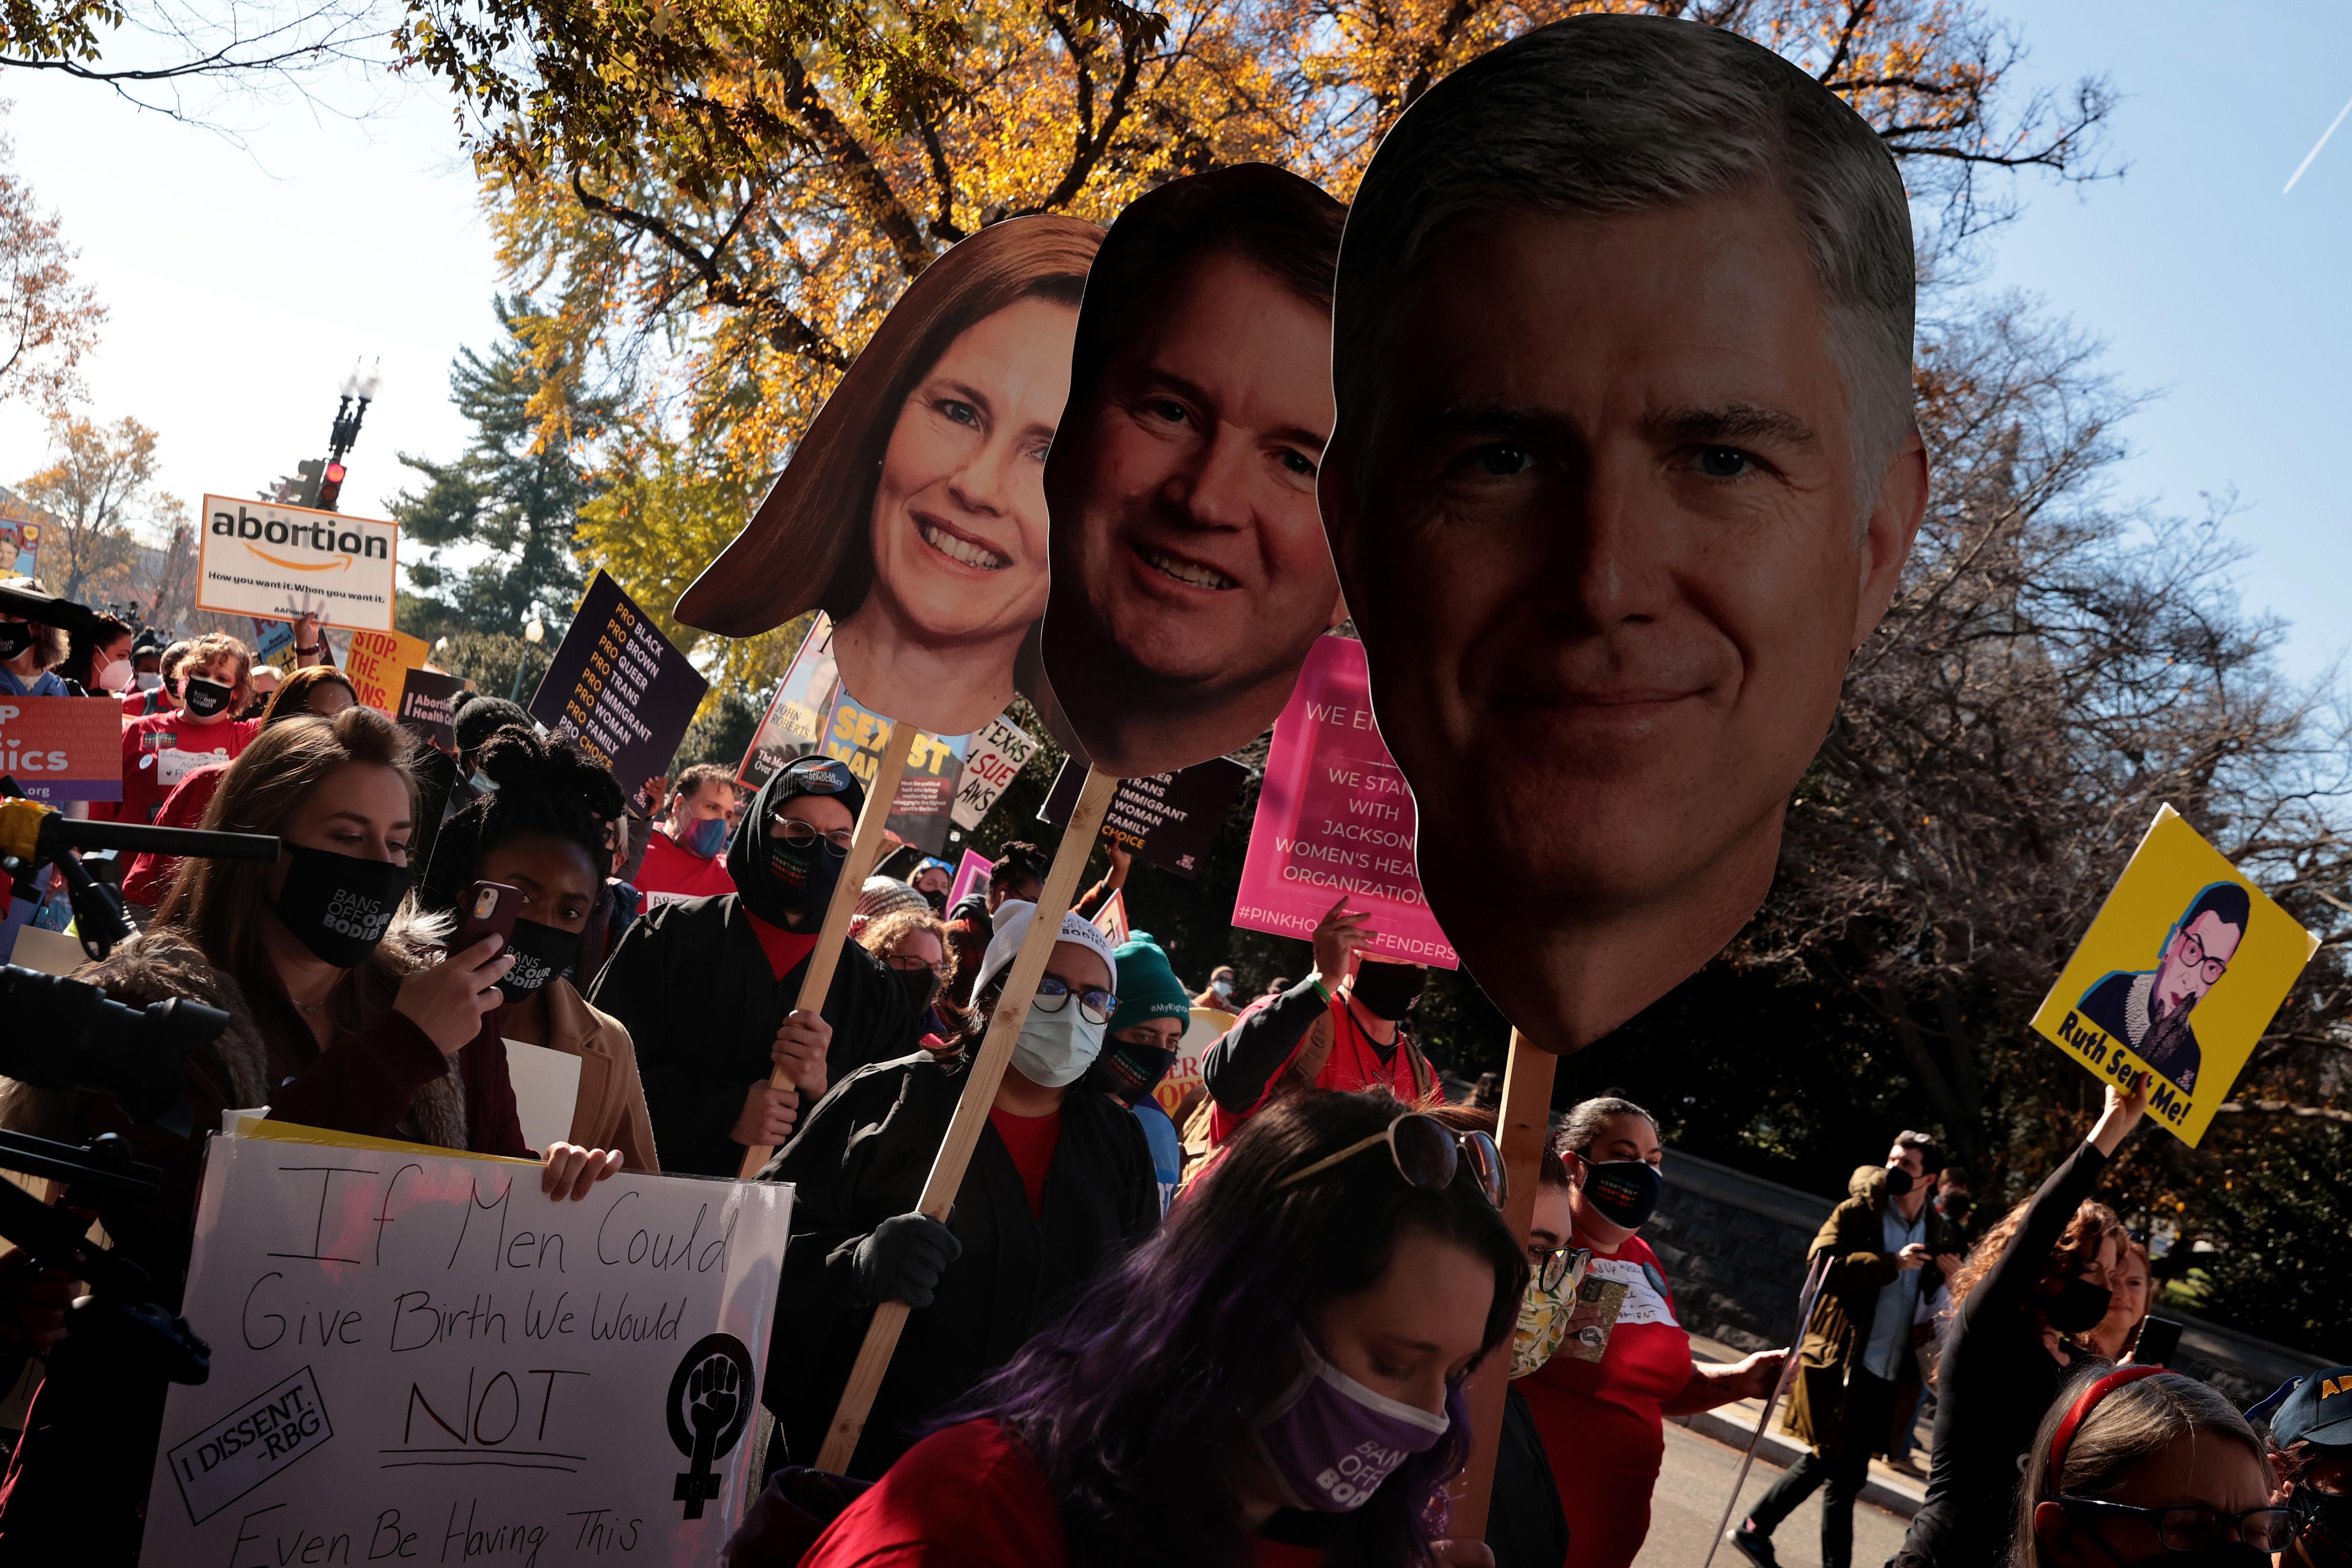 People march with protest signs and large photographic cutouts of Amy Coney Barrett, Brett Kavanaugh, and Neil Gorsuch on a sunny day